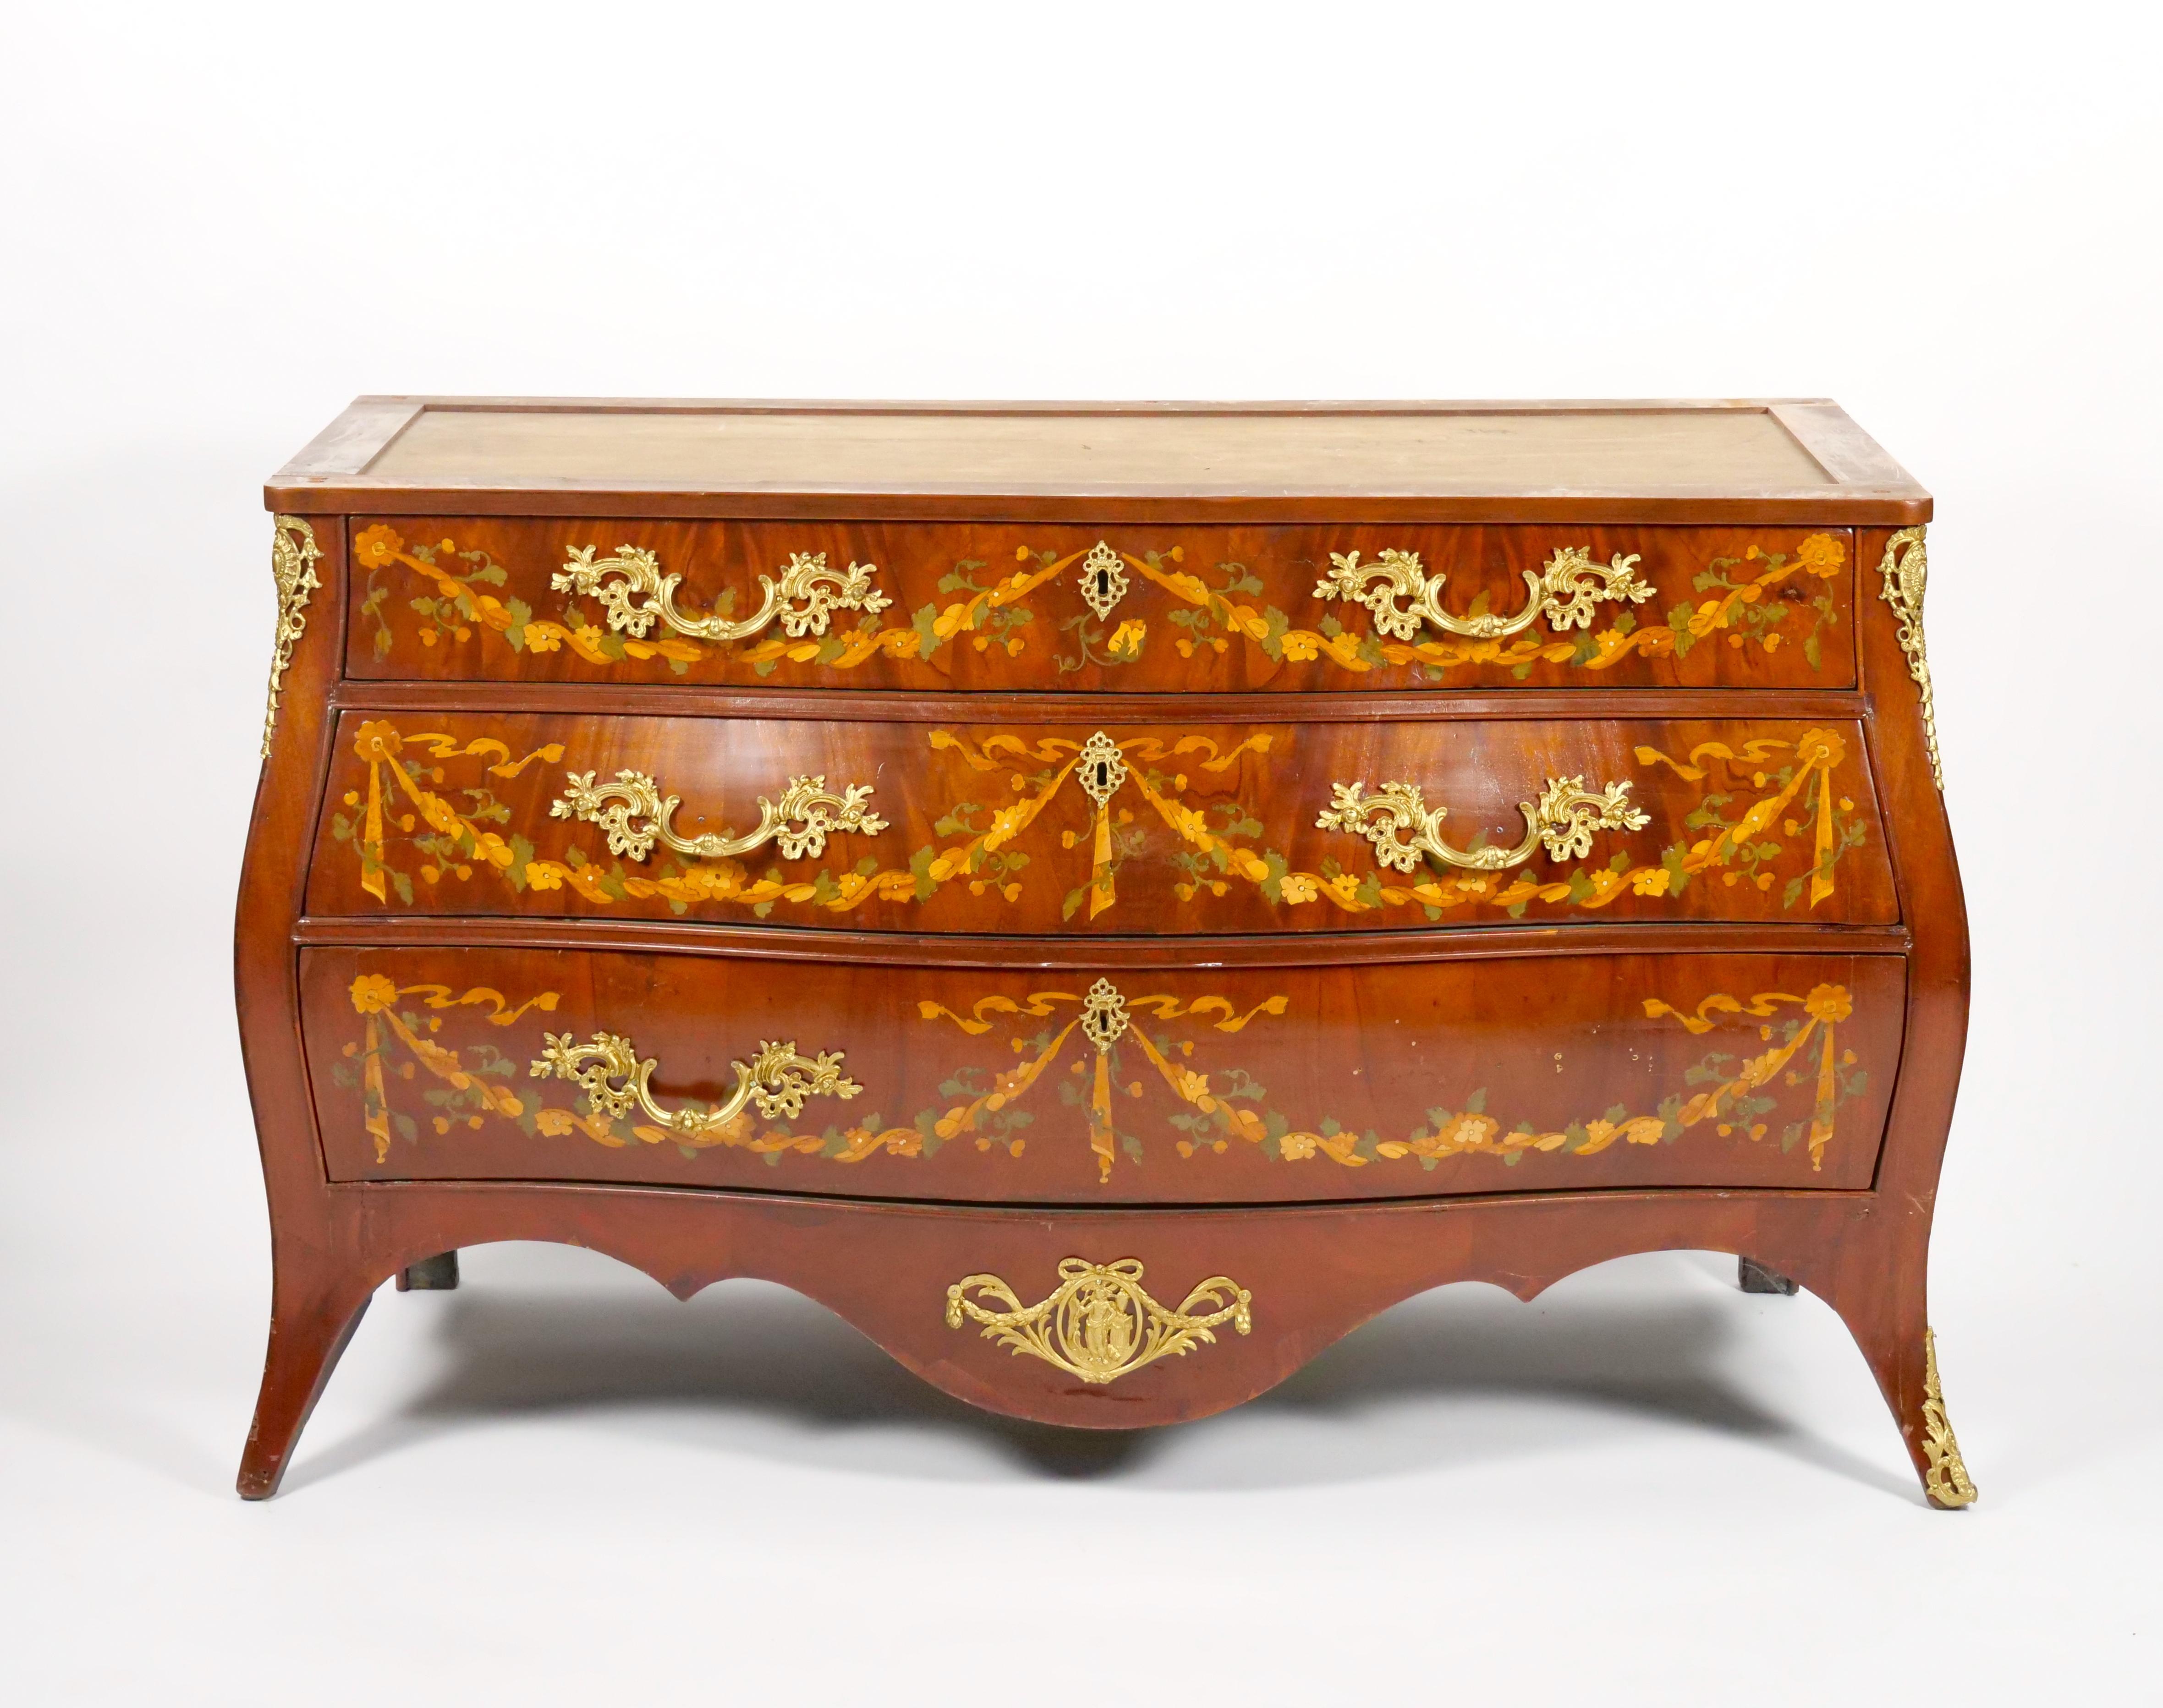 Hand-Carved Antique Marble Top Floral Marquetry Inlaid Mahogany Commode / Credenza For Sale